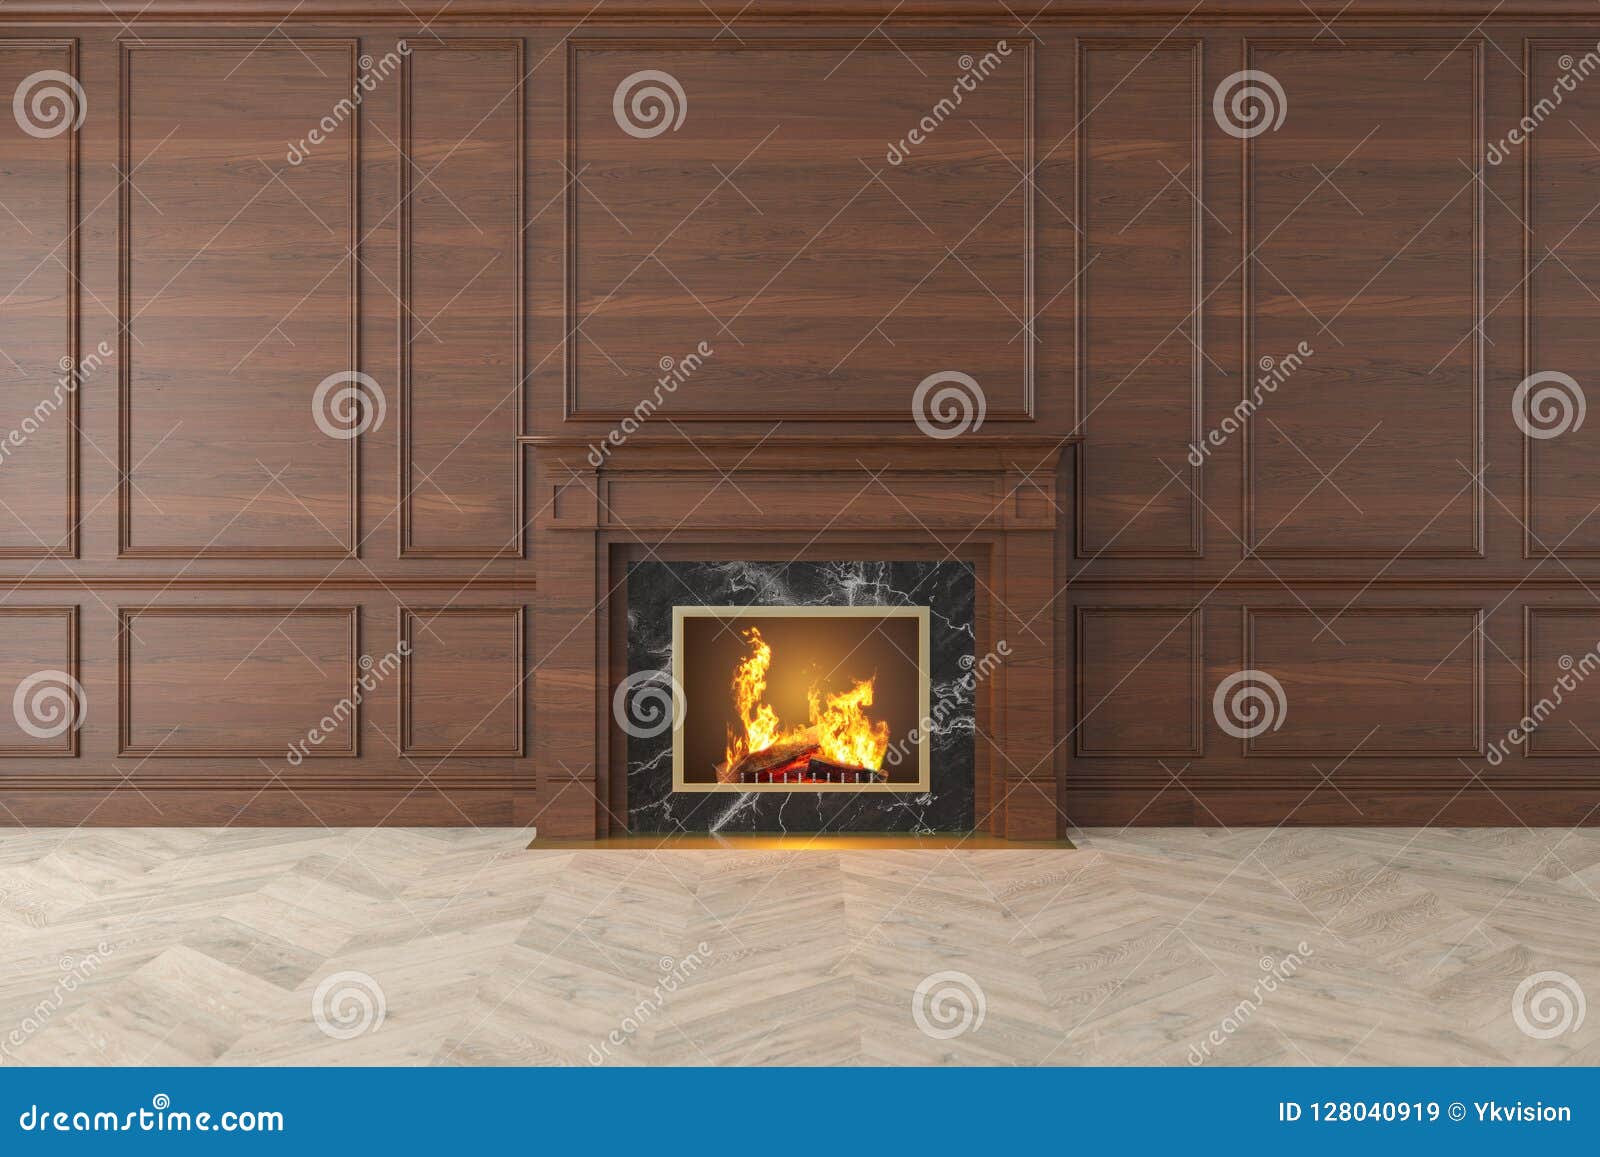 Modern Classic Wood Interior With Fireplace Wall Panels